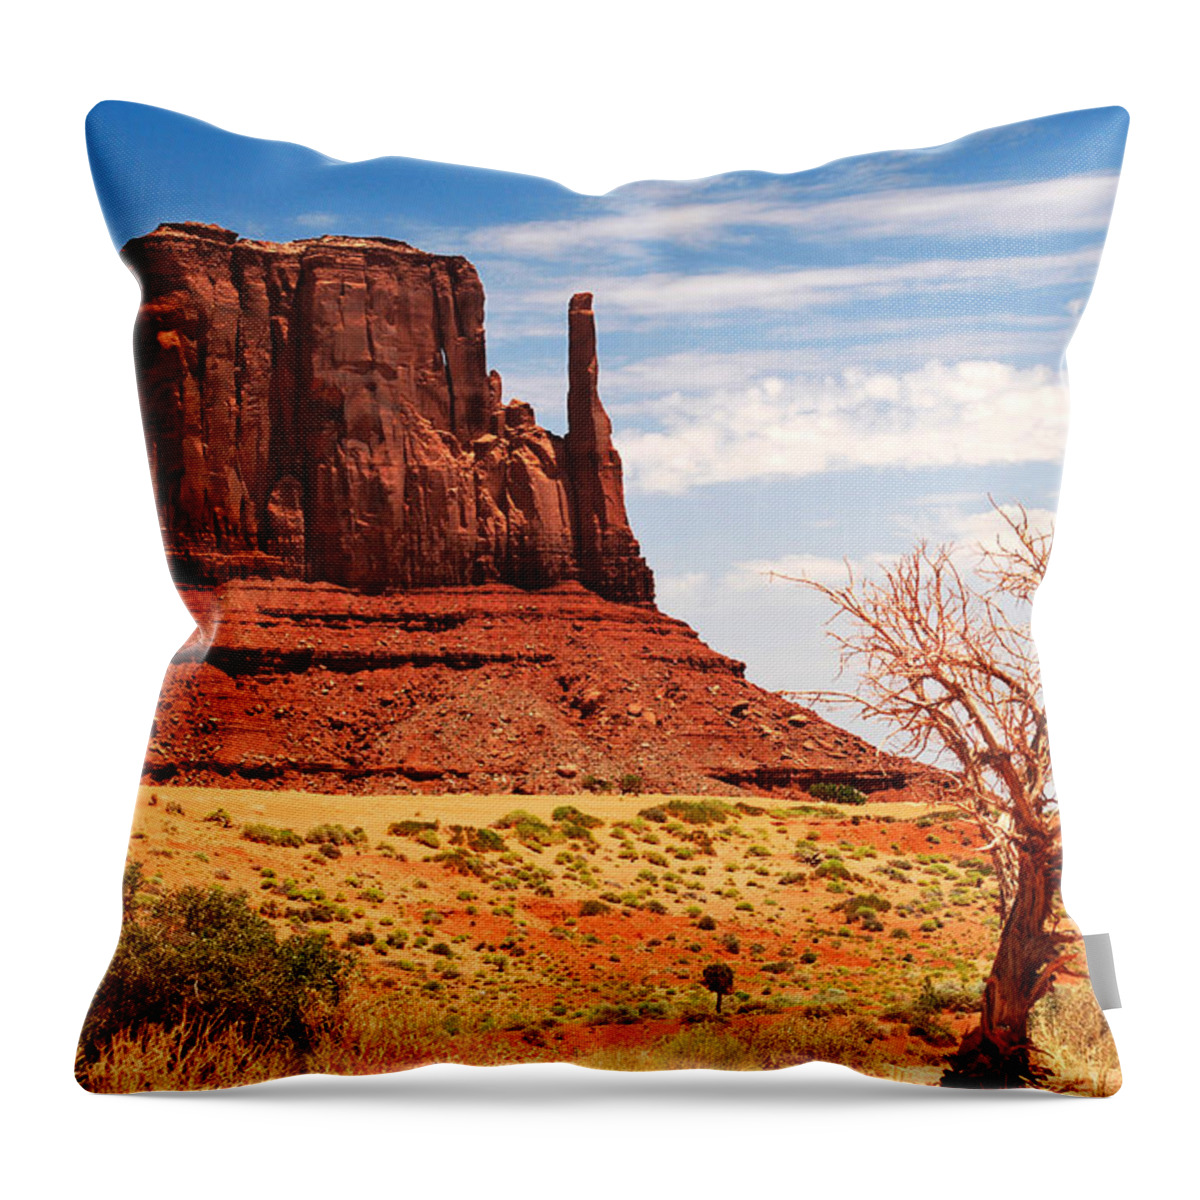 Dirt Throw Pillow featuring the photograph Monument Mitten by Gregory Ballos